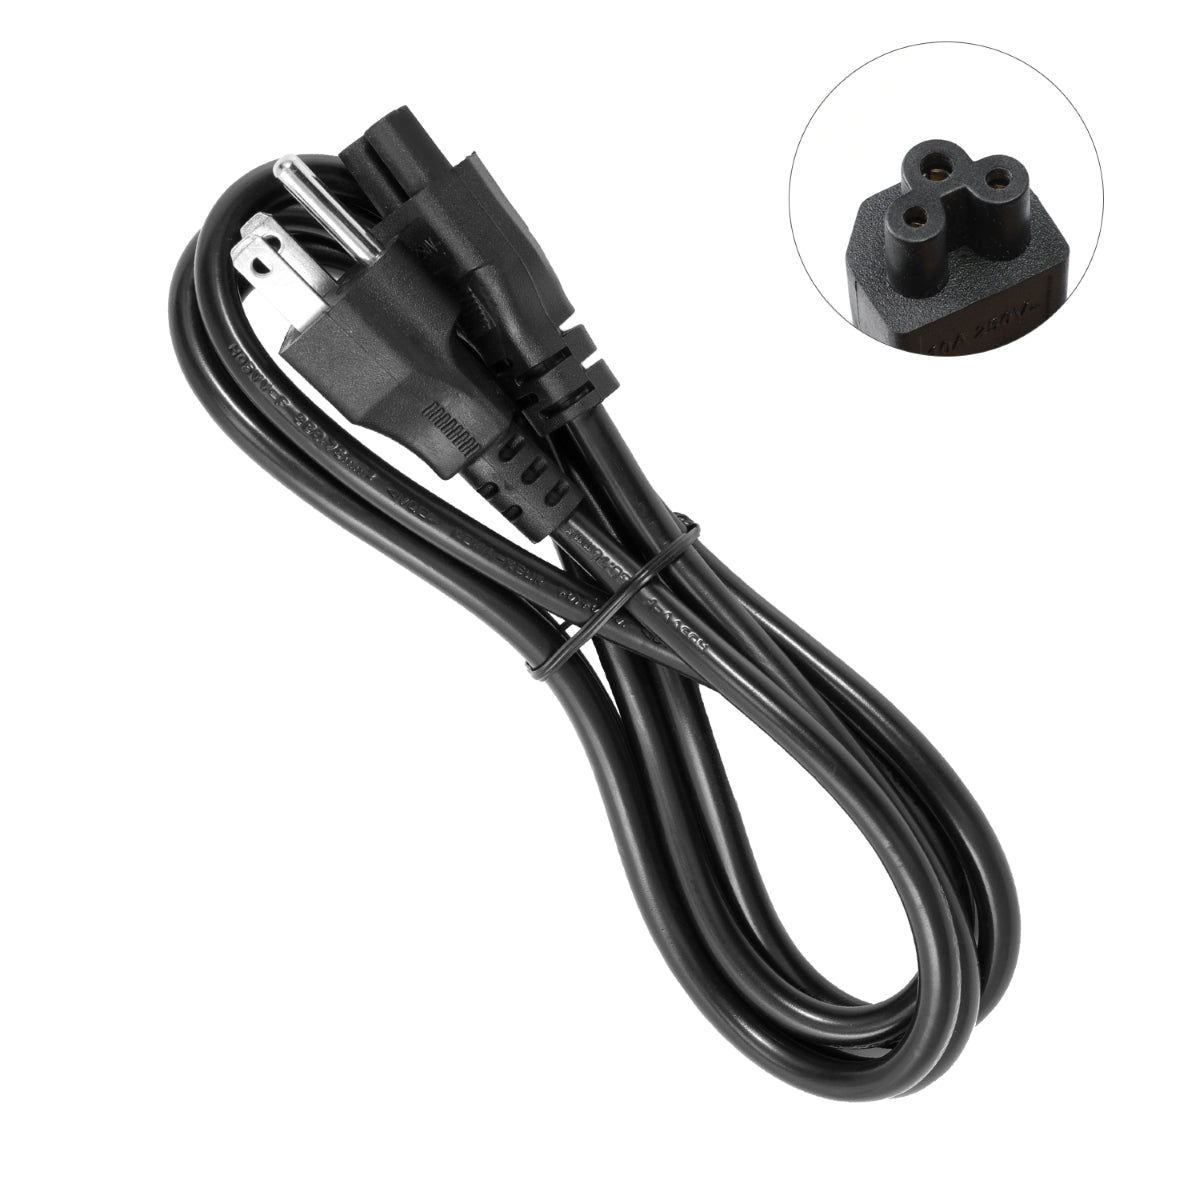 Power Cord for LG 32LB5600 Monitor.